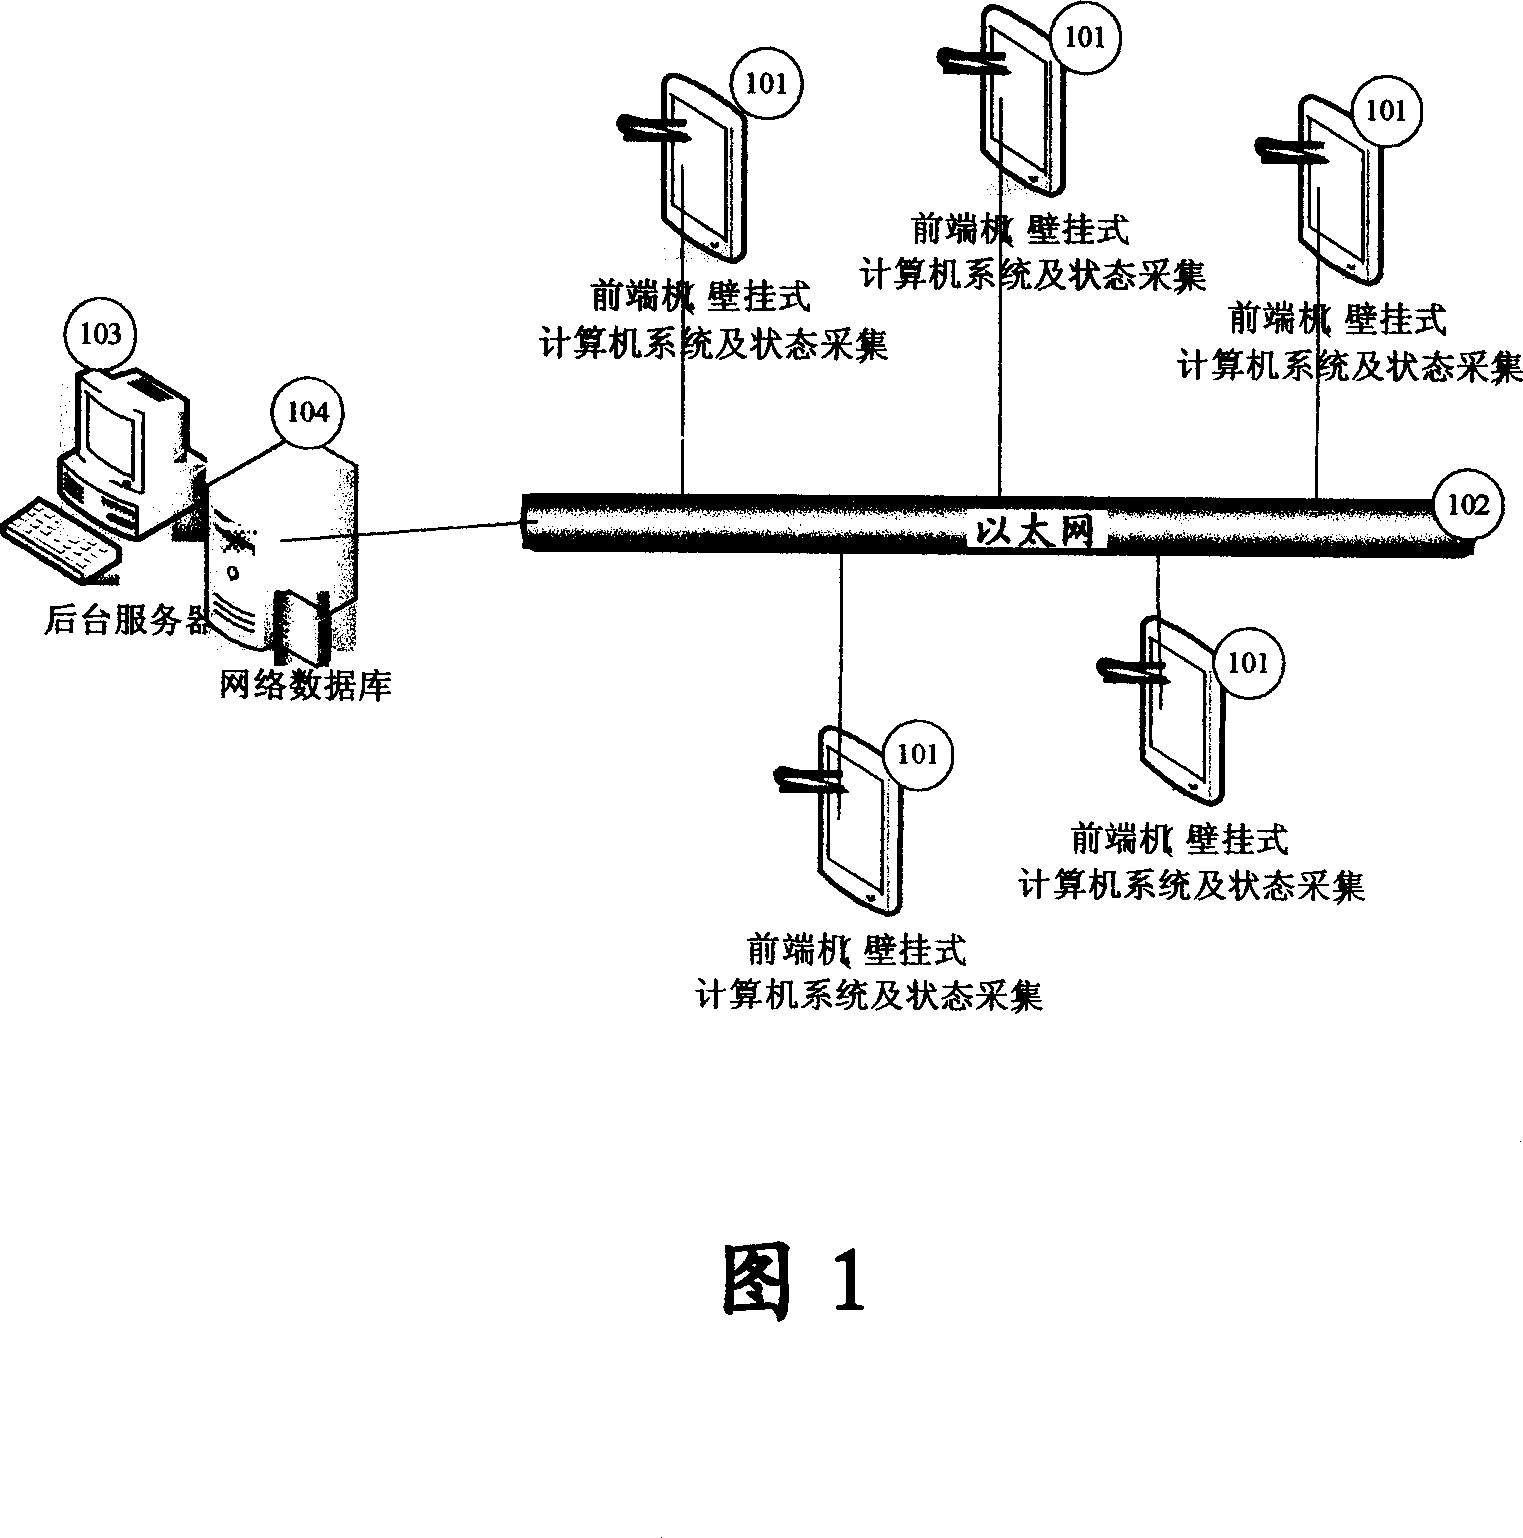 Equipment monitoring system and equipment monitoring method